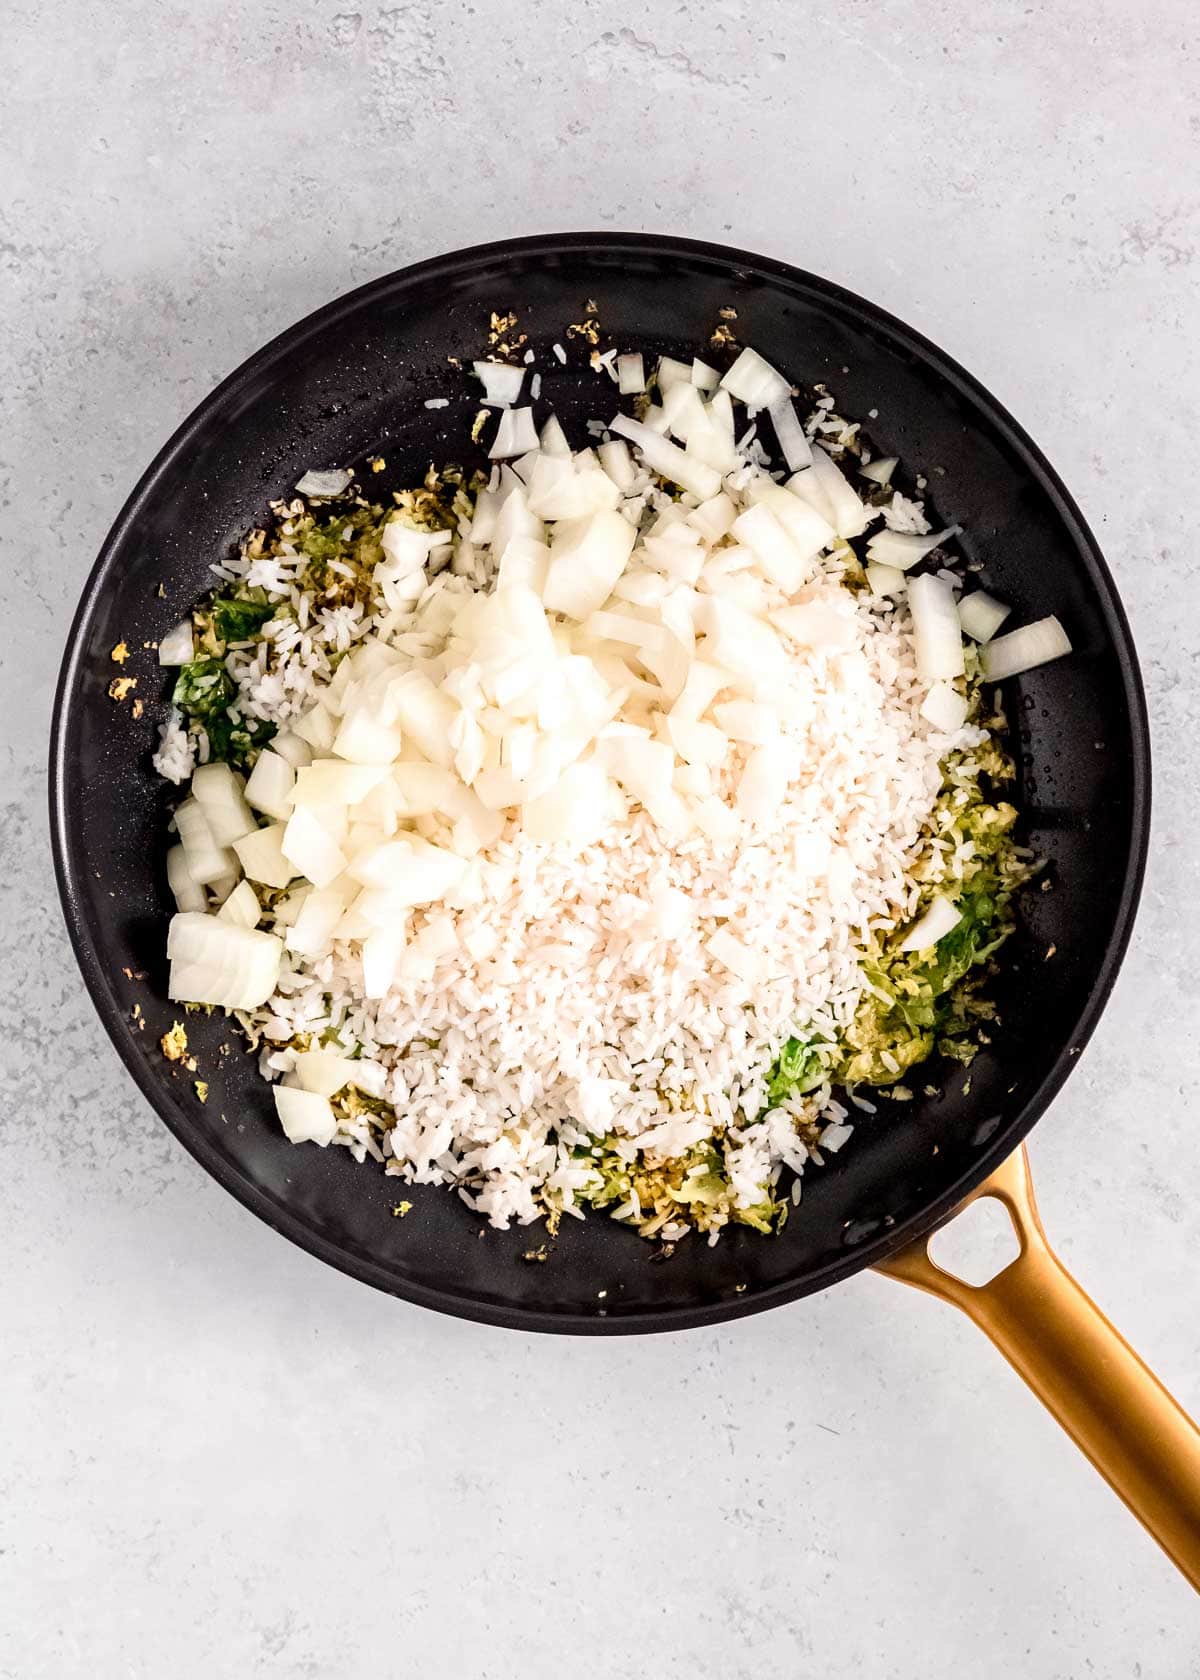 diced onion added to a hot skillet with cold rice and sauteed brussels sprouts and garlic